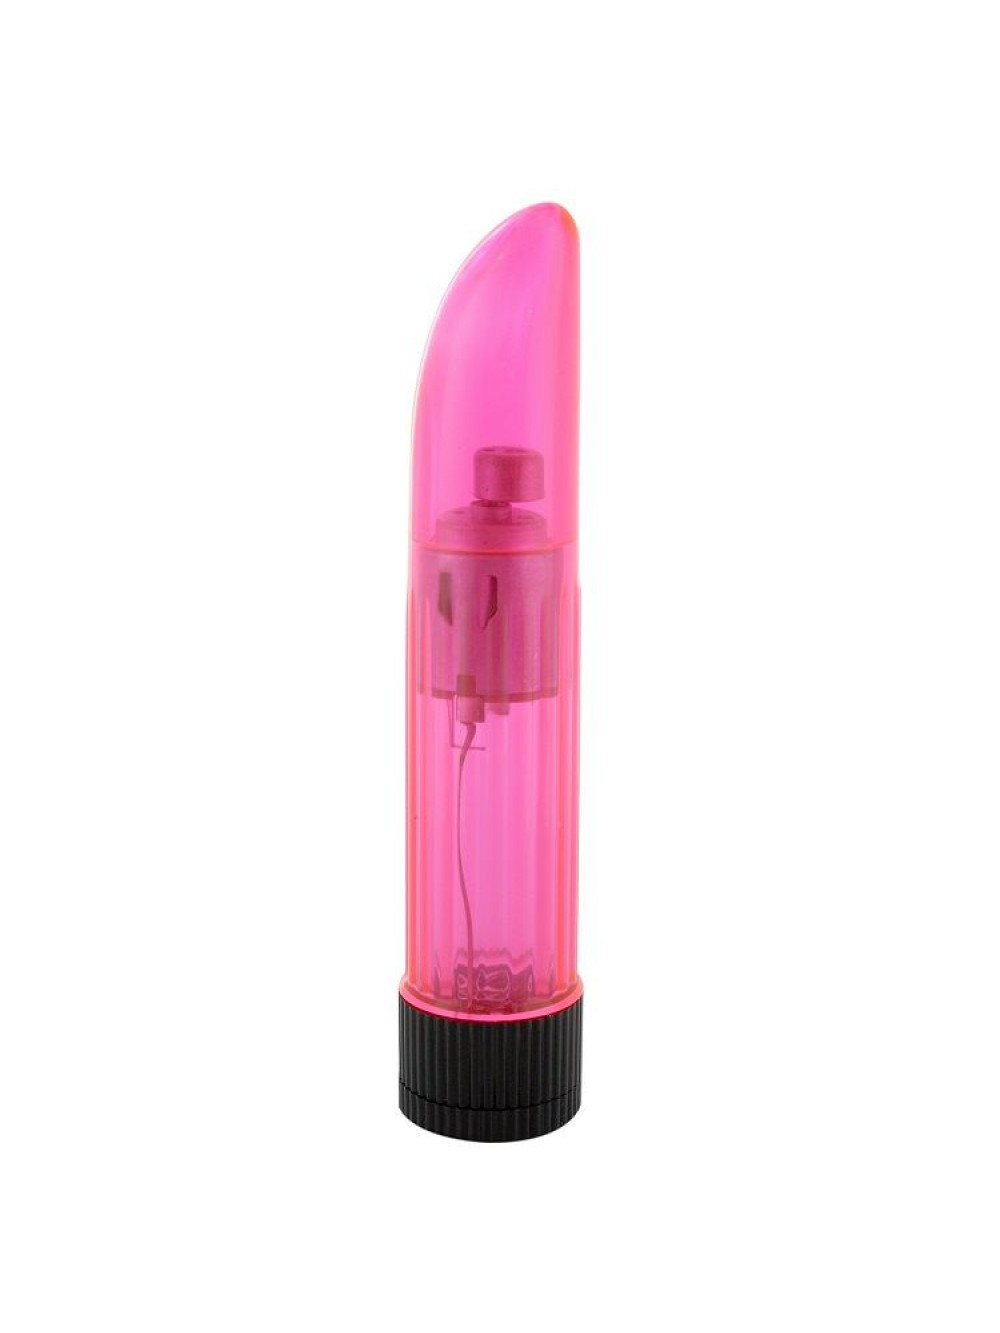 CRYSTAL CLEAR VIBRATOR LADY PINK 4890888444425